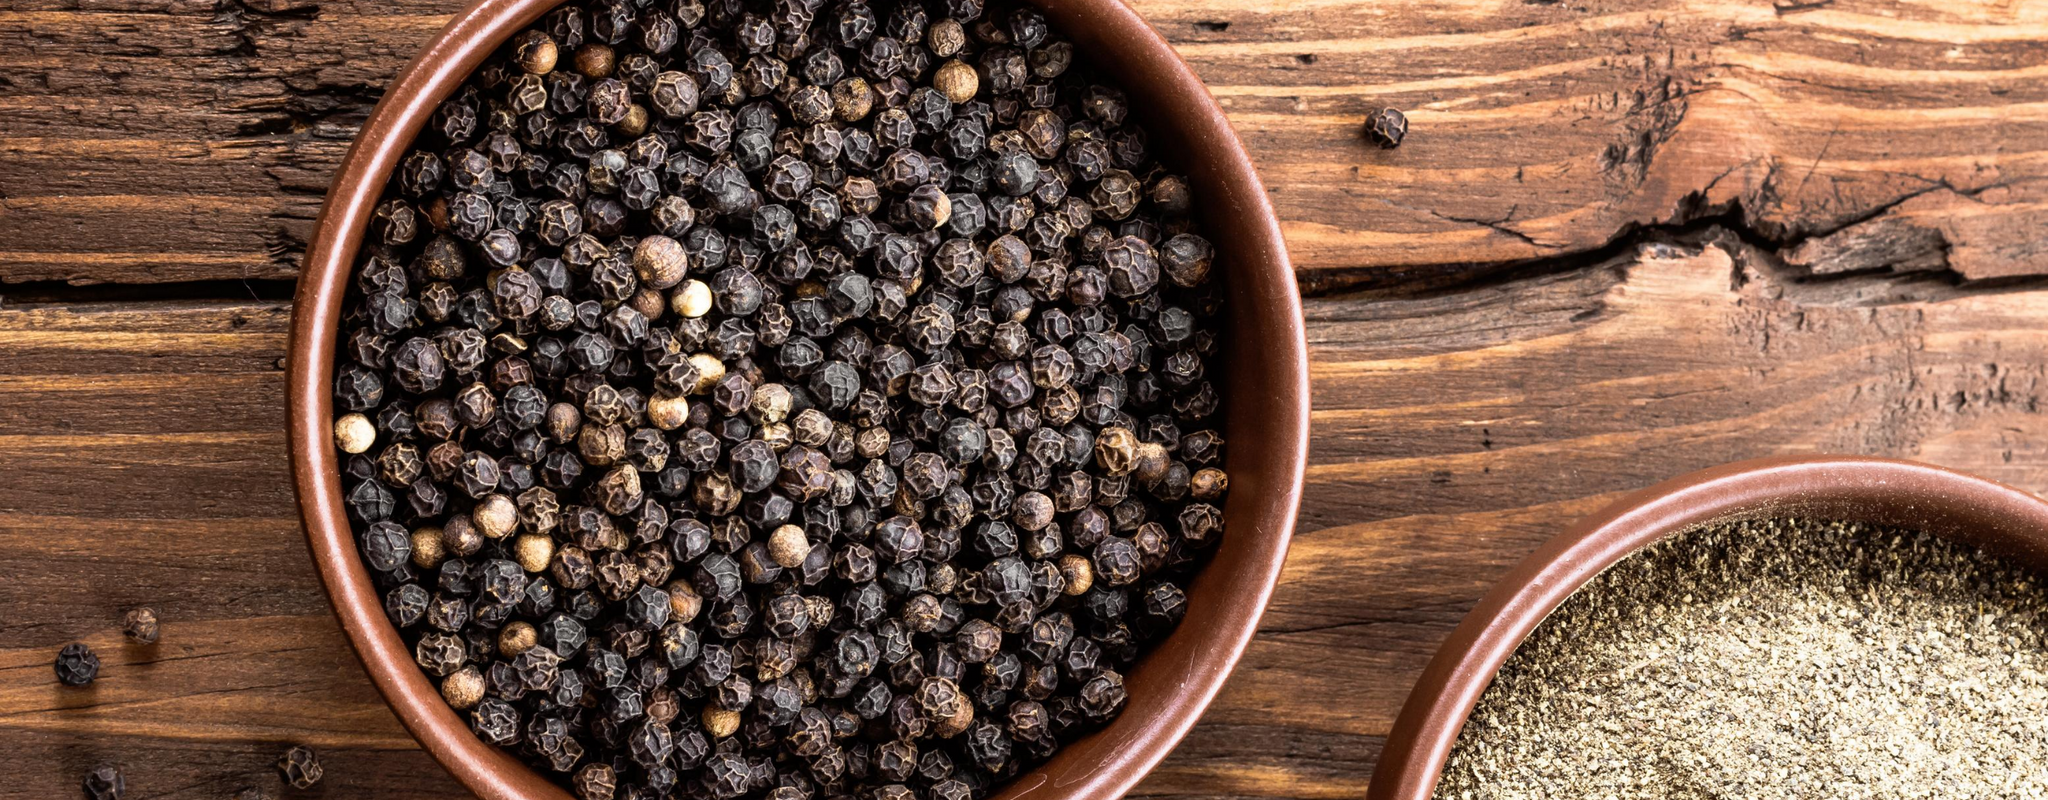 8 Benefits Of Black Pepper For A Healthy Lifestyle